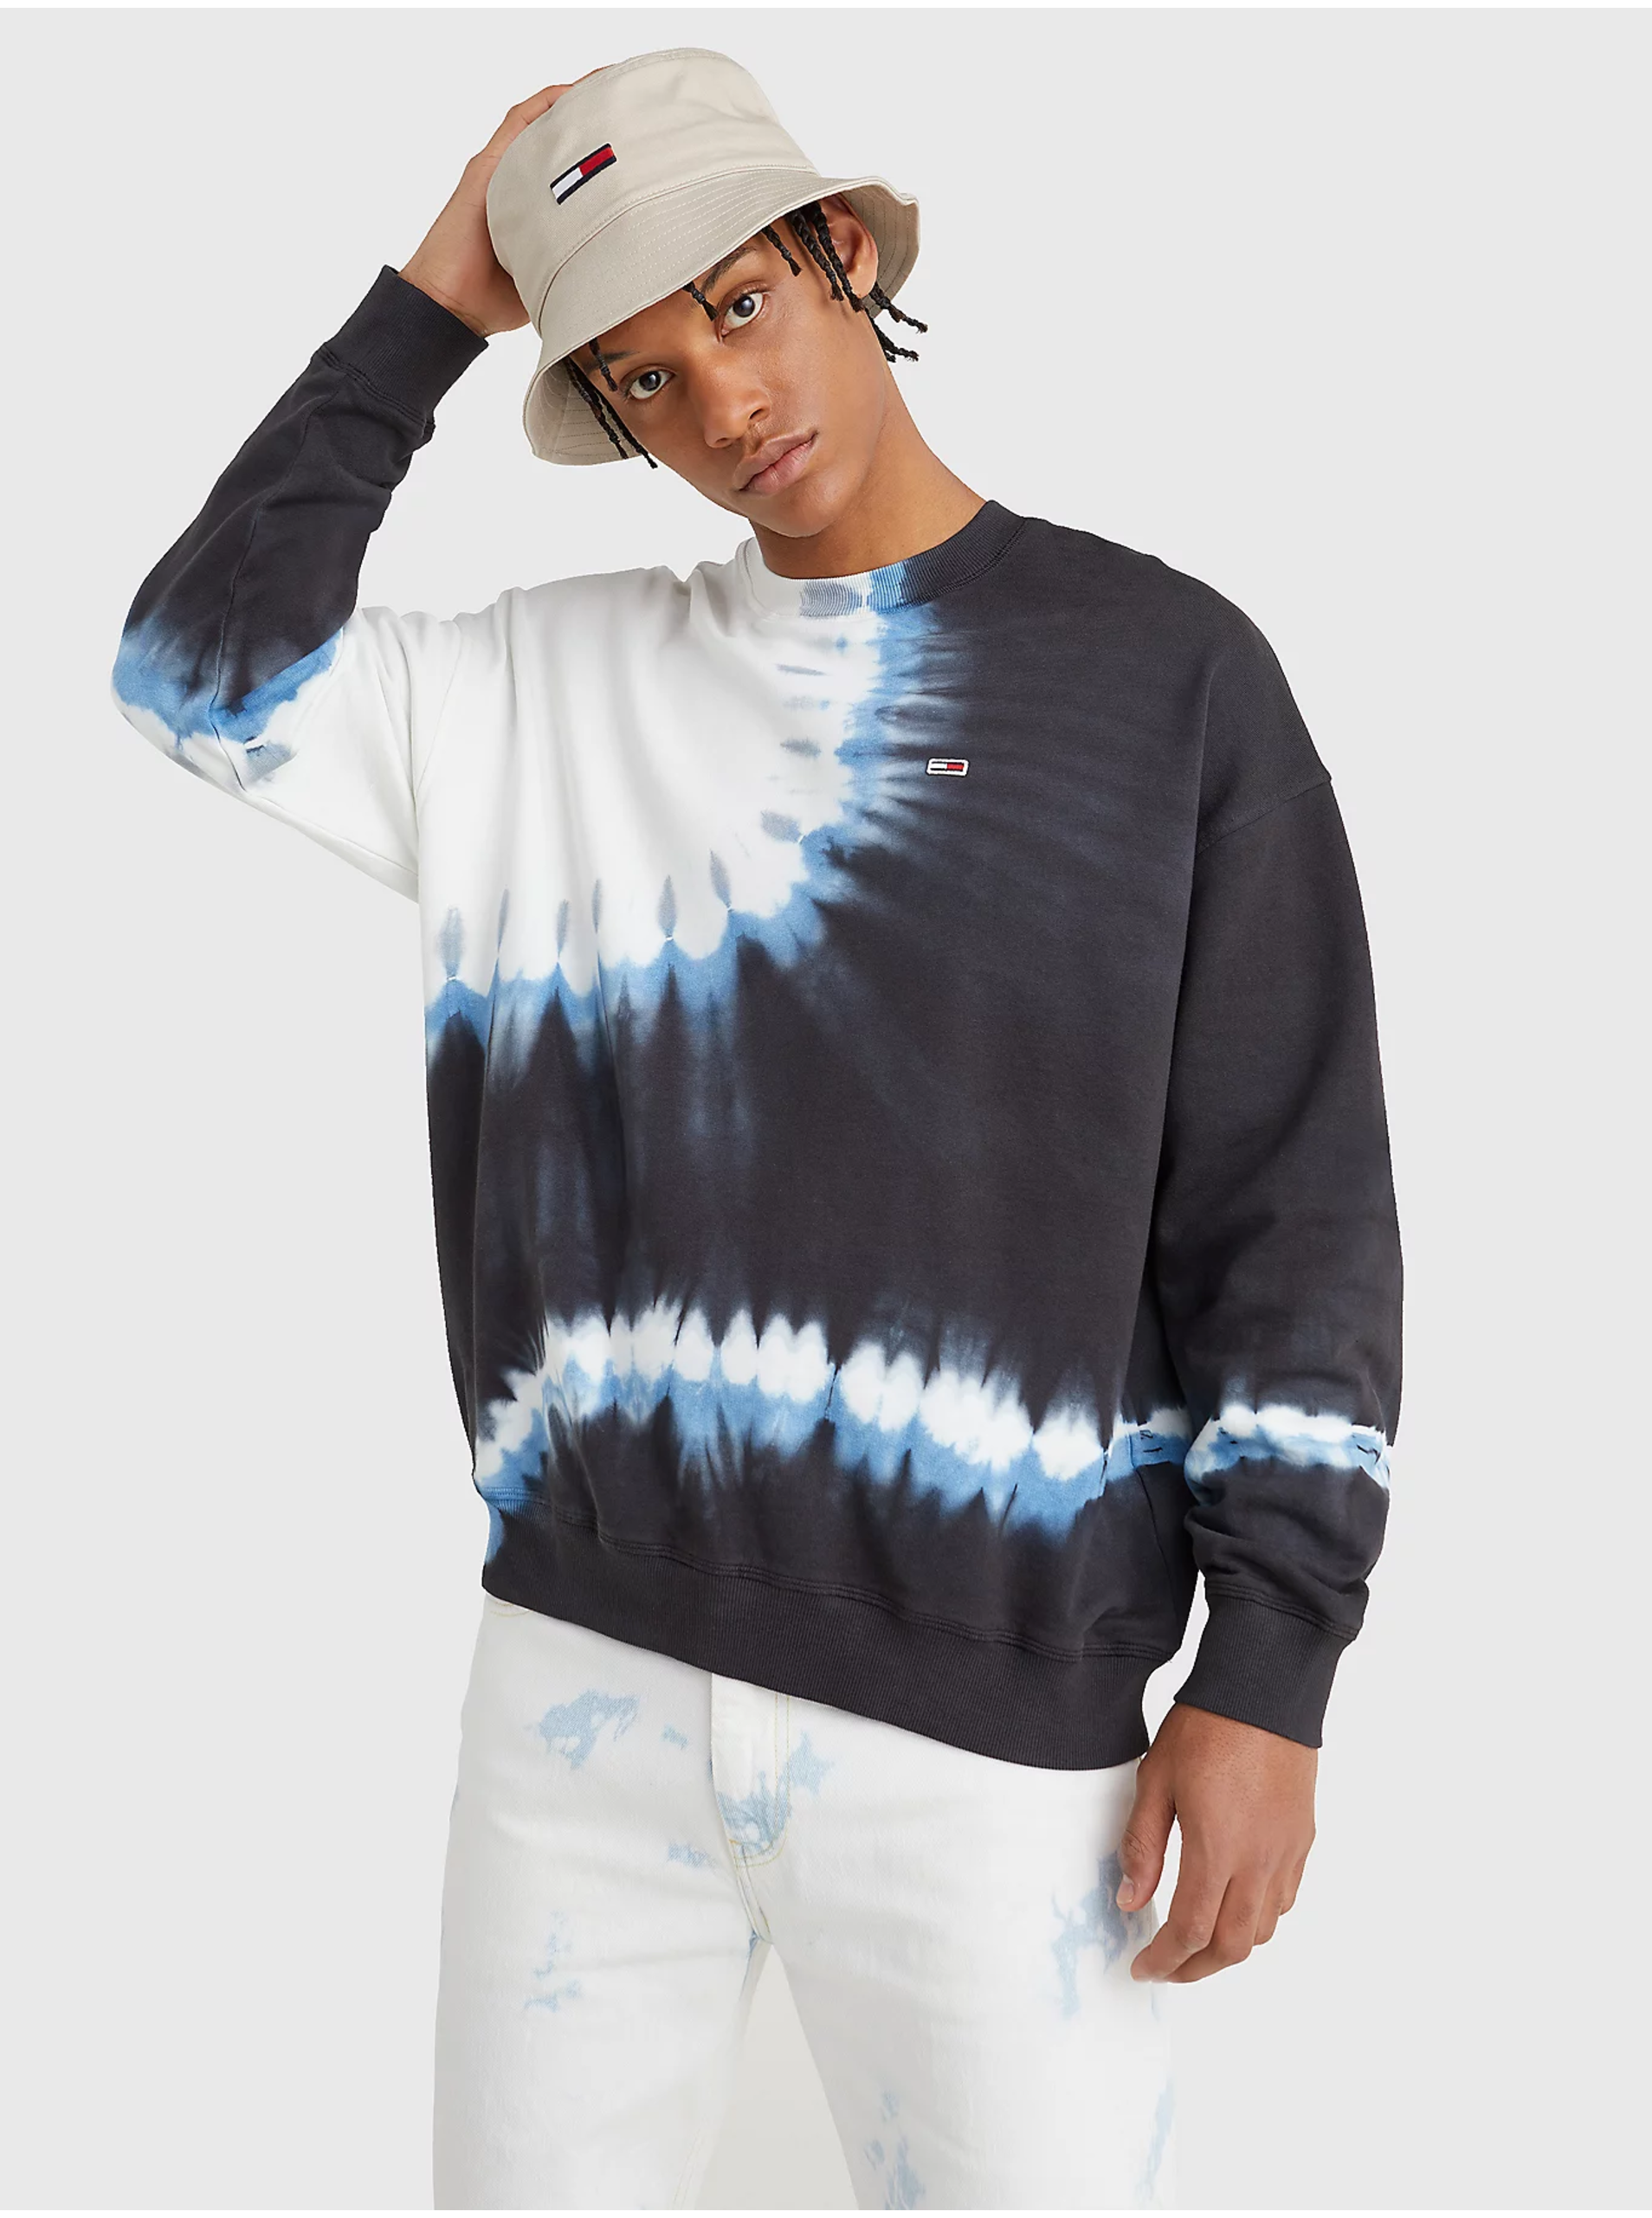 White and Black Mens Patterned Sweatshirt Tommy Jeans - Men